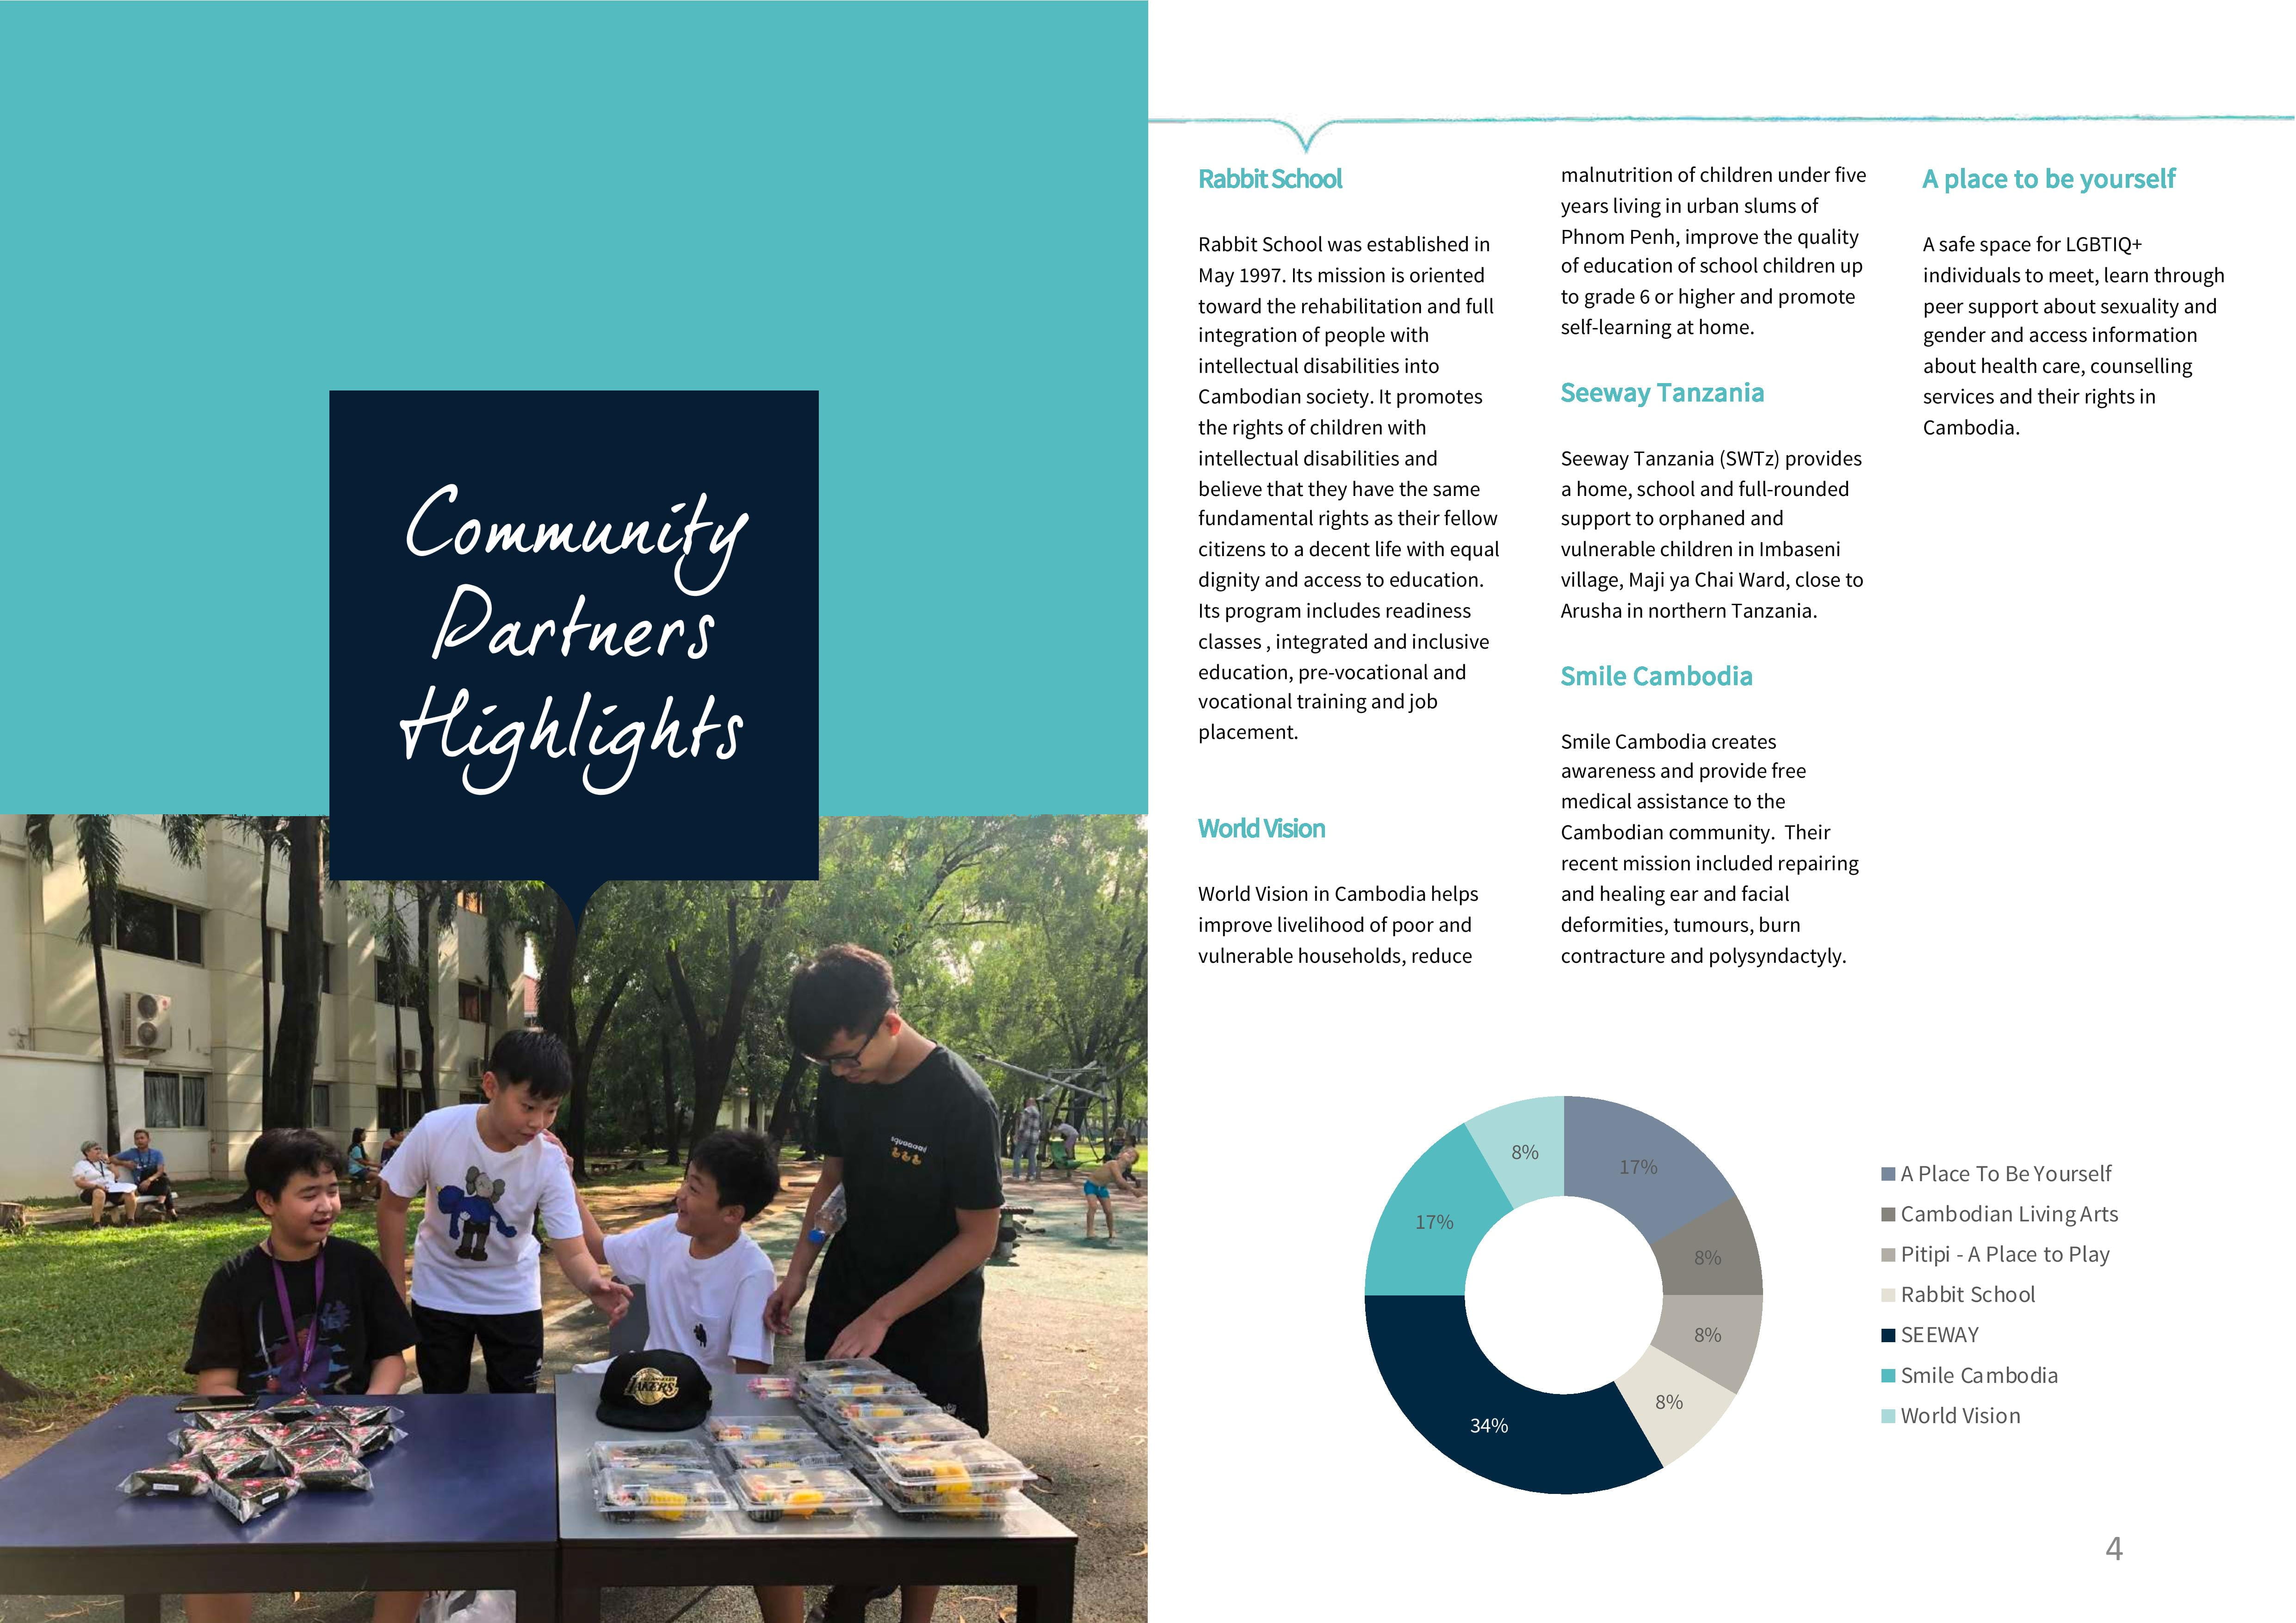 Share A Dream platform launched at Northbridge for social outreach activities-share-a-dream-platform-launched-at-northbridge-for-social-outreach-activities-NISC report term 1 20192020page004